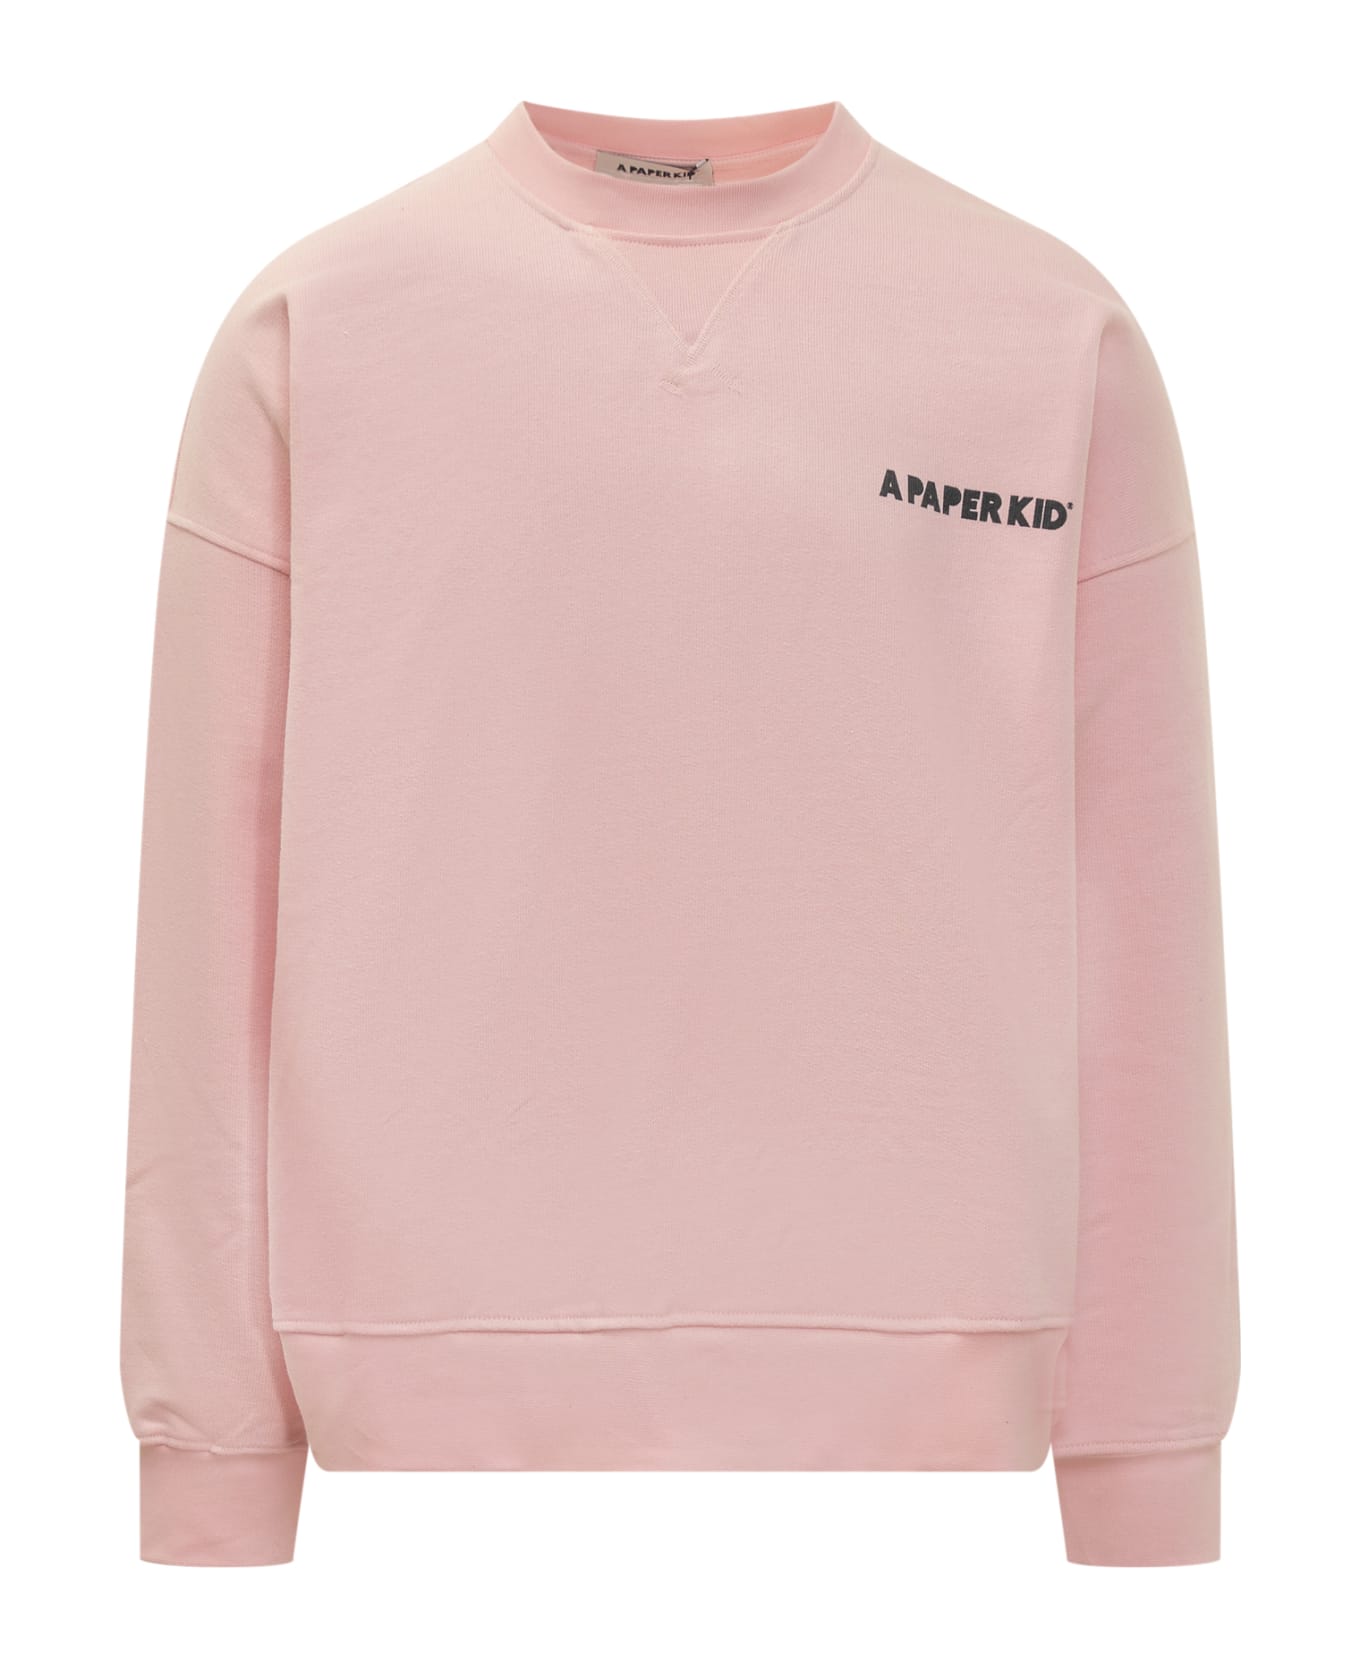 A Paper Kid Oversize Sweatshirt With Print - PINK